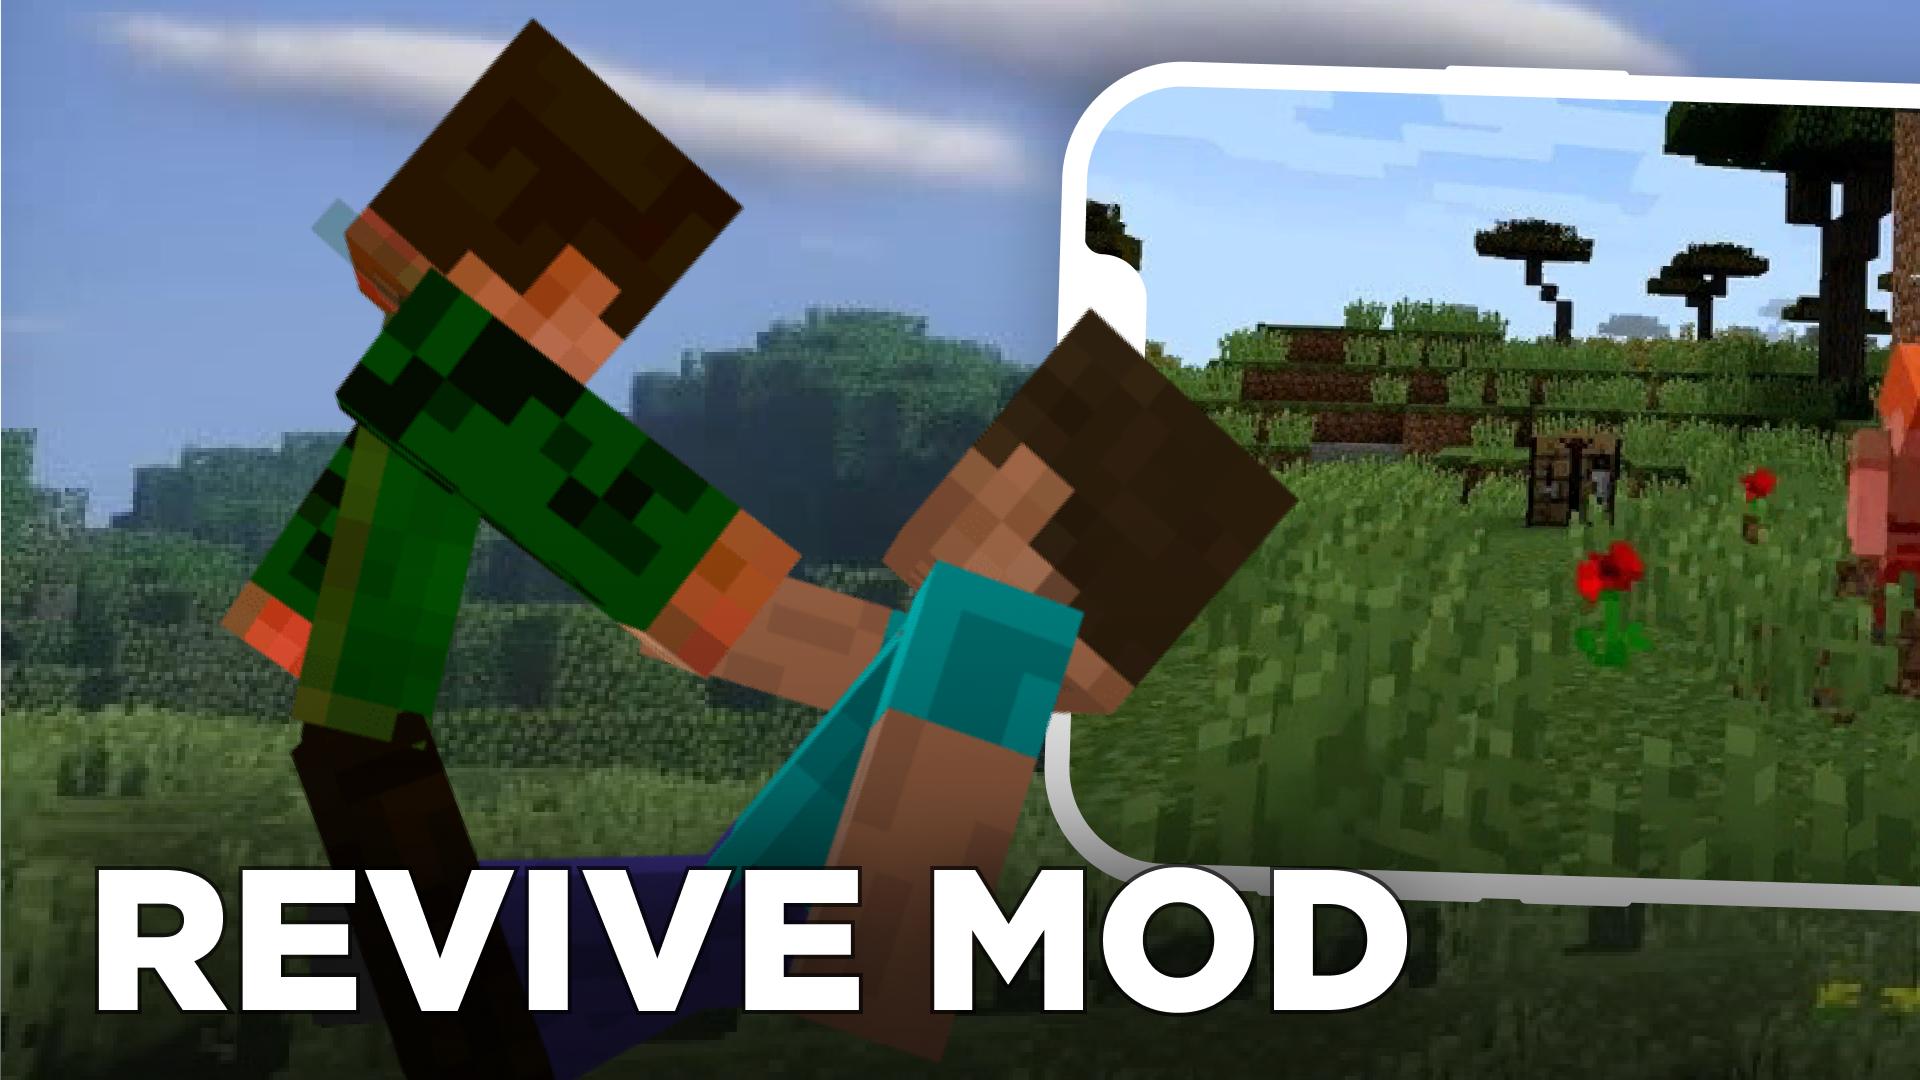 Play Mods. Mod Revival. Revive Player 1.16.5 t Launcher. Player revive